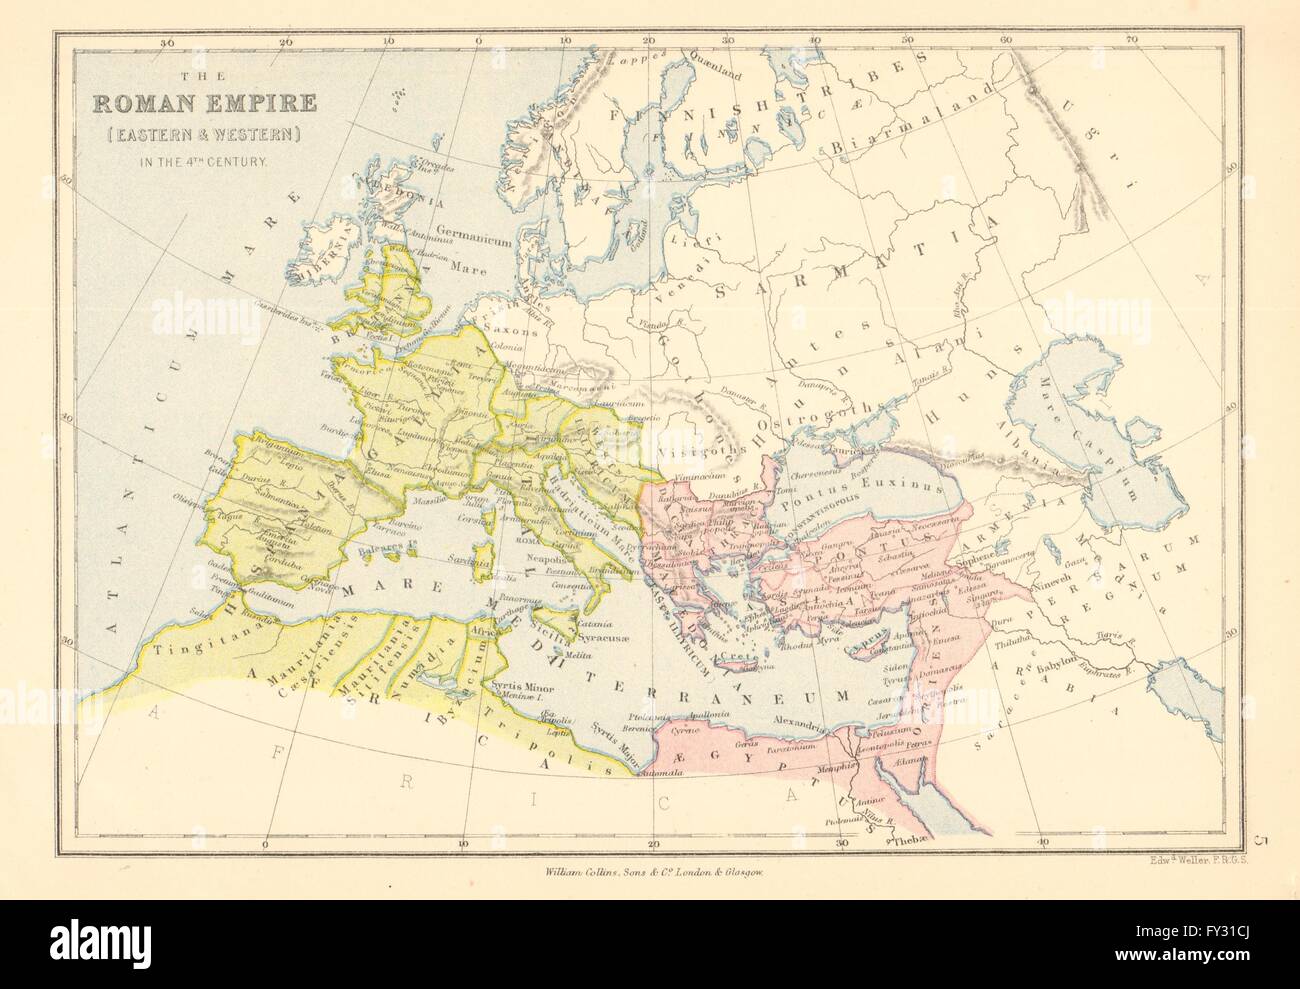 ROMAN EMPIRE. In the 4th century. Eastern & Western. BARTHOLOMEW, 1876 old map Stock Photo